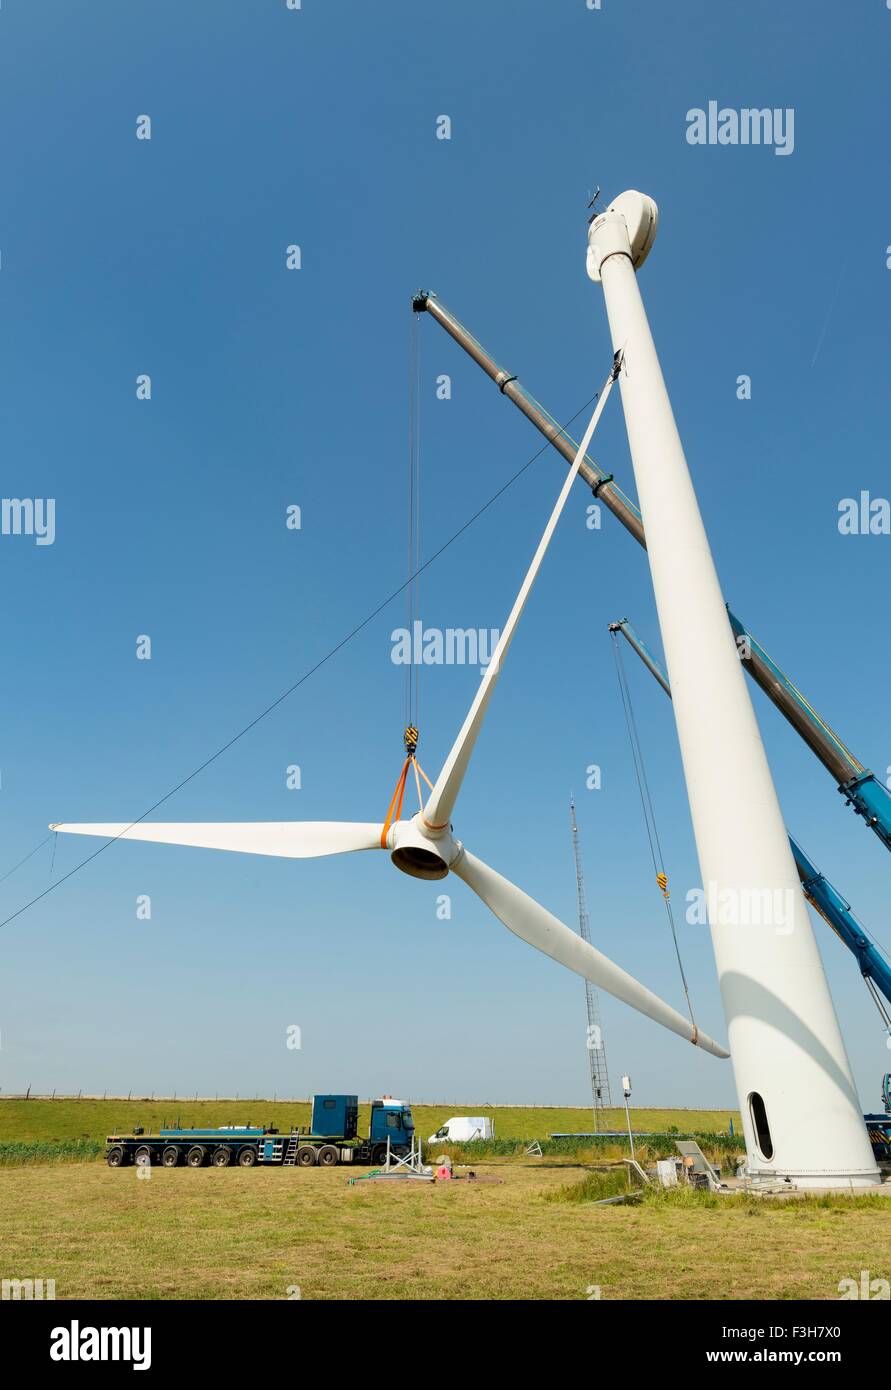 Low angle view of wind turbine being dismantled Stock Photo